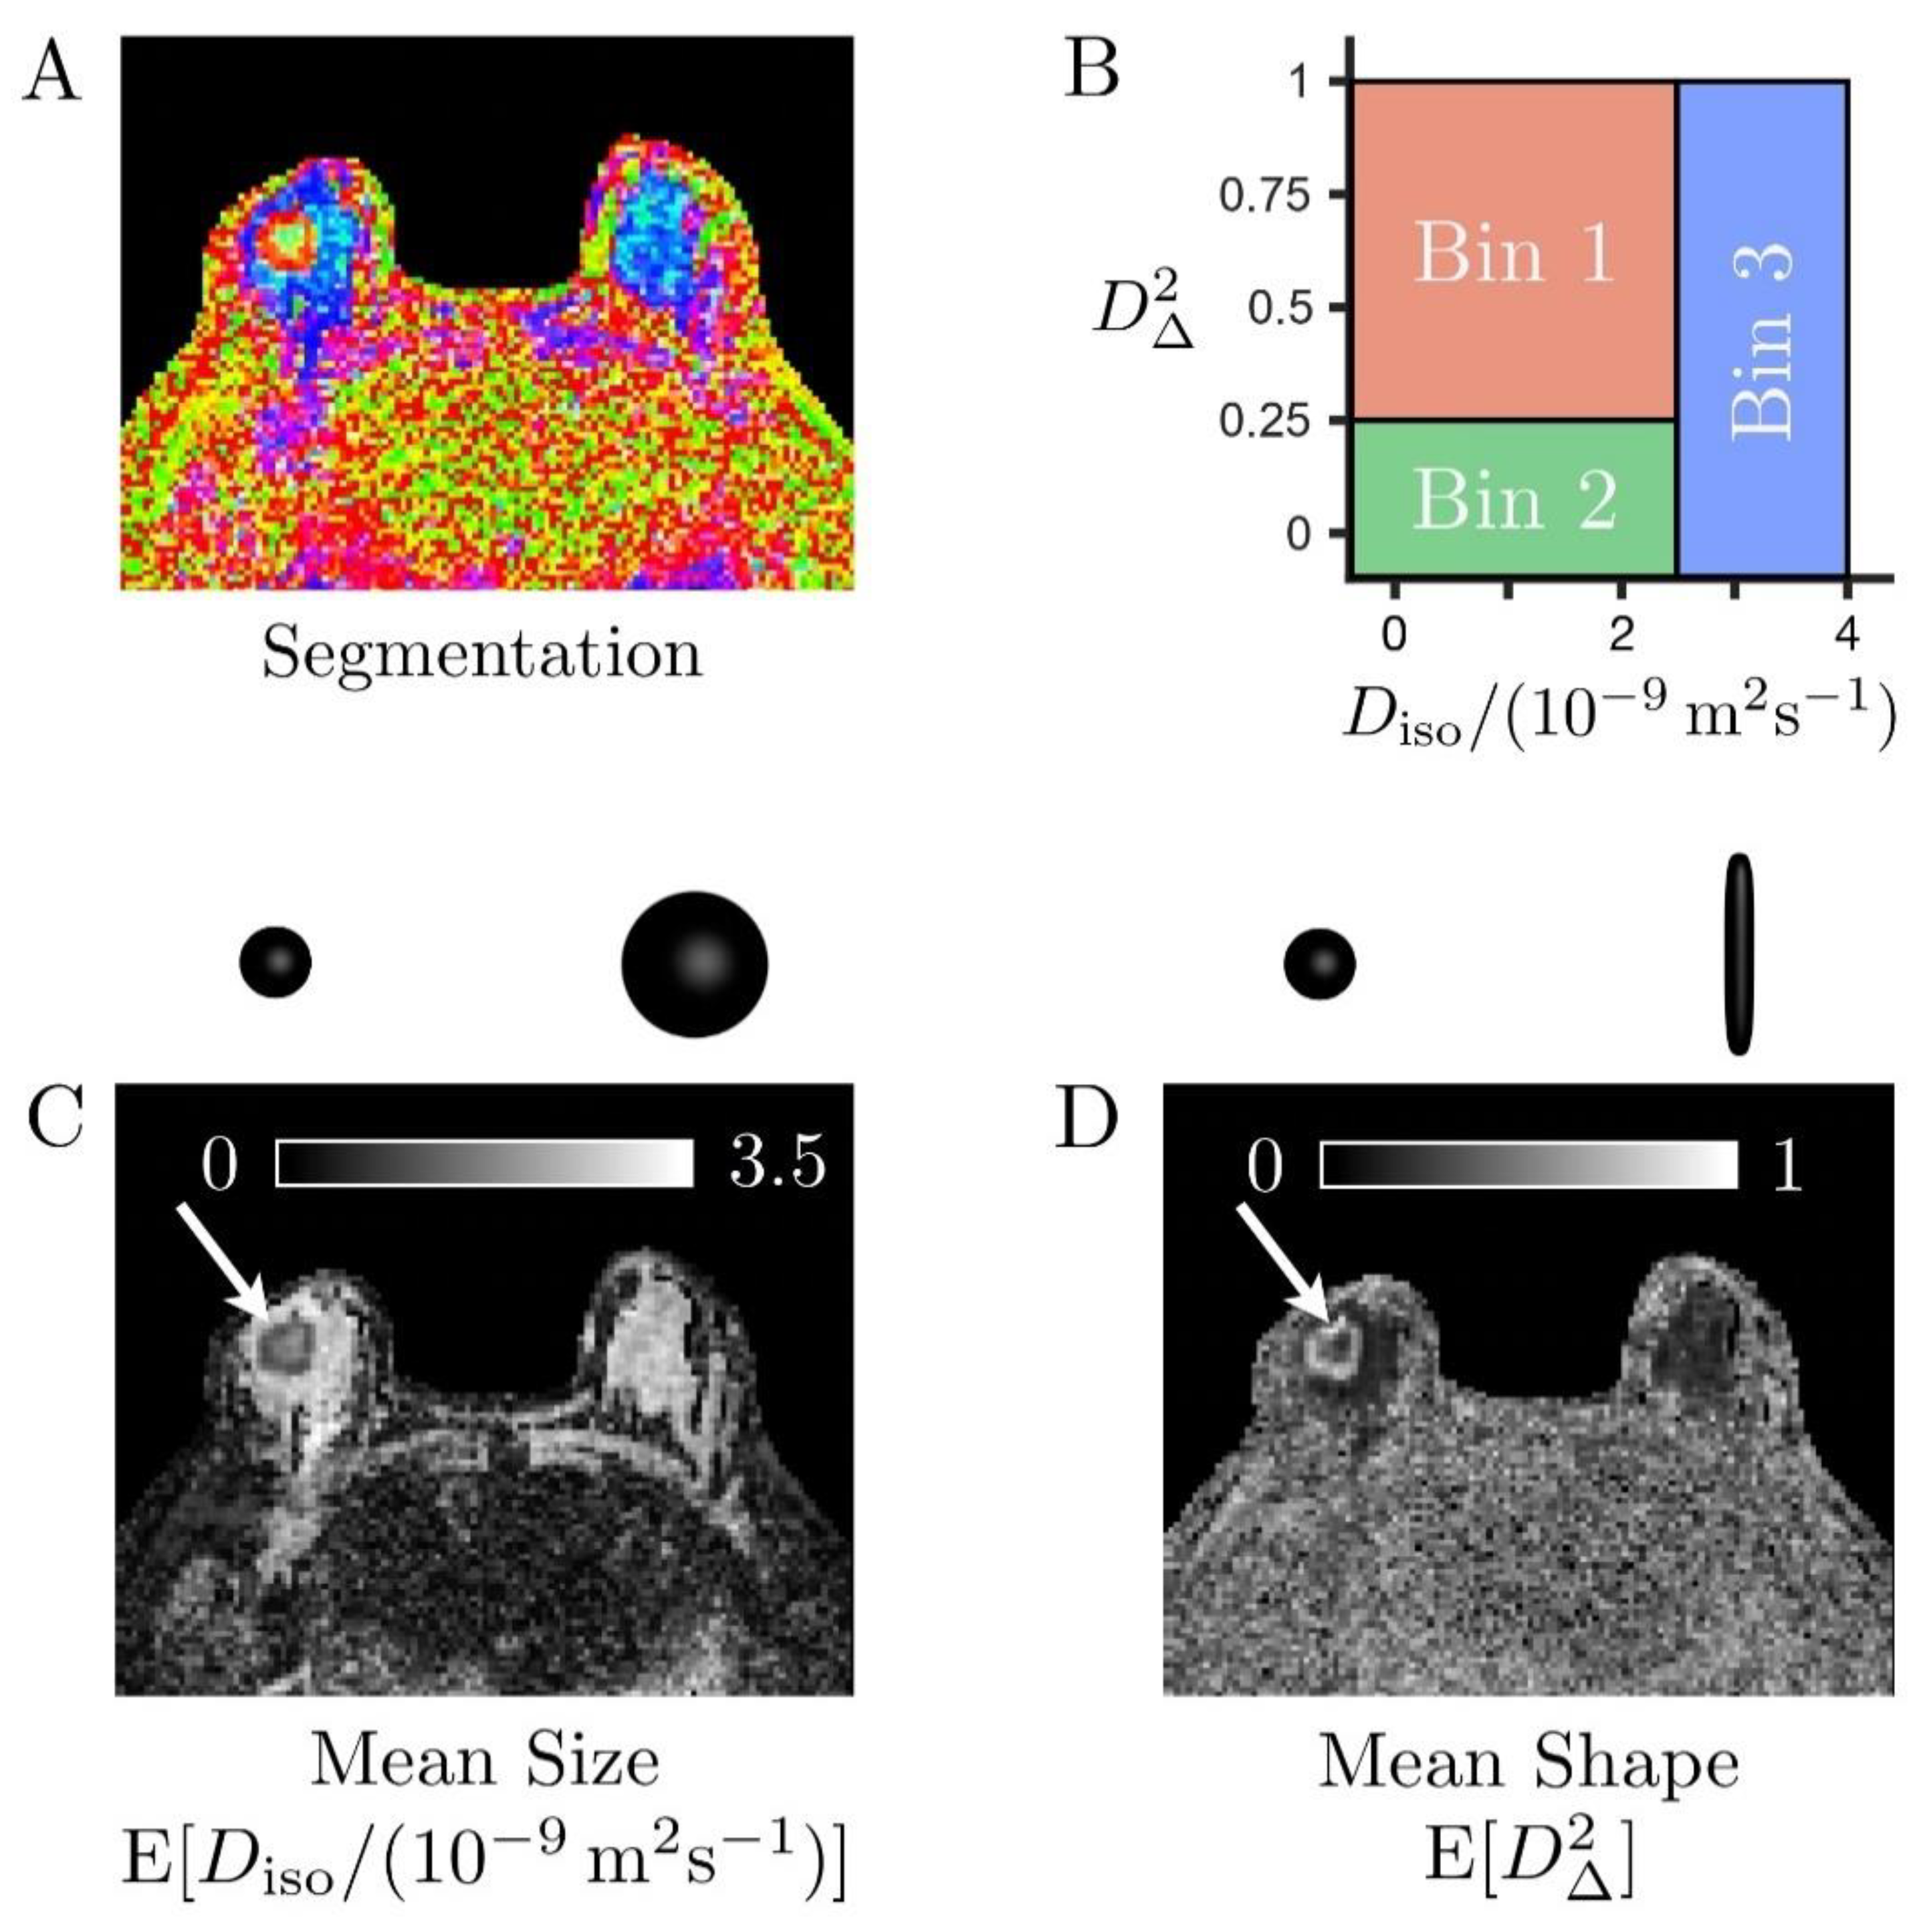 cancers free full text multidimensional diffusion magnetic resonance imaging for characterization of tissue microstructure in breast cancer patients a prospective pilot study html